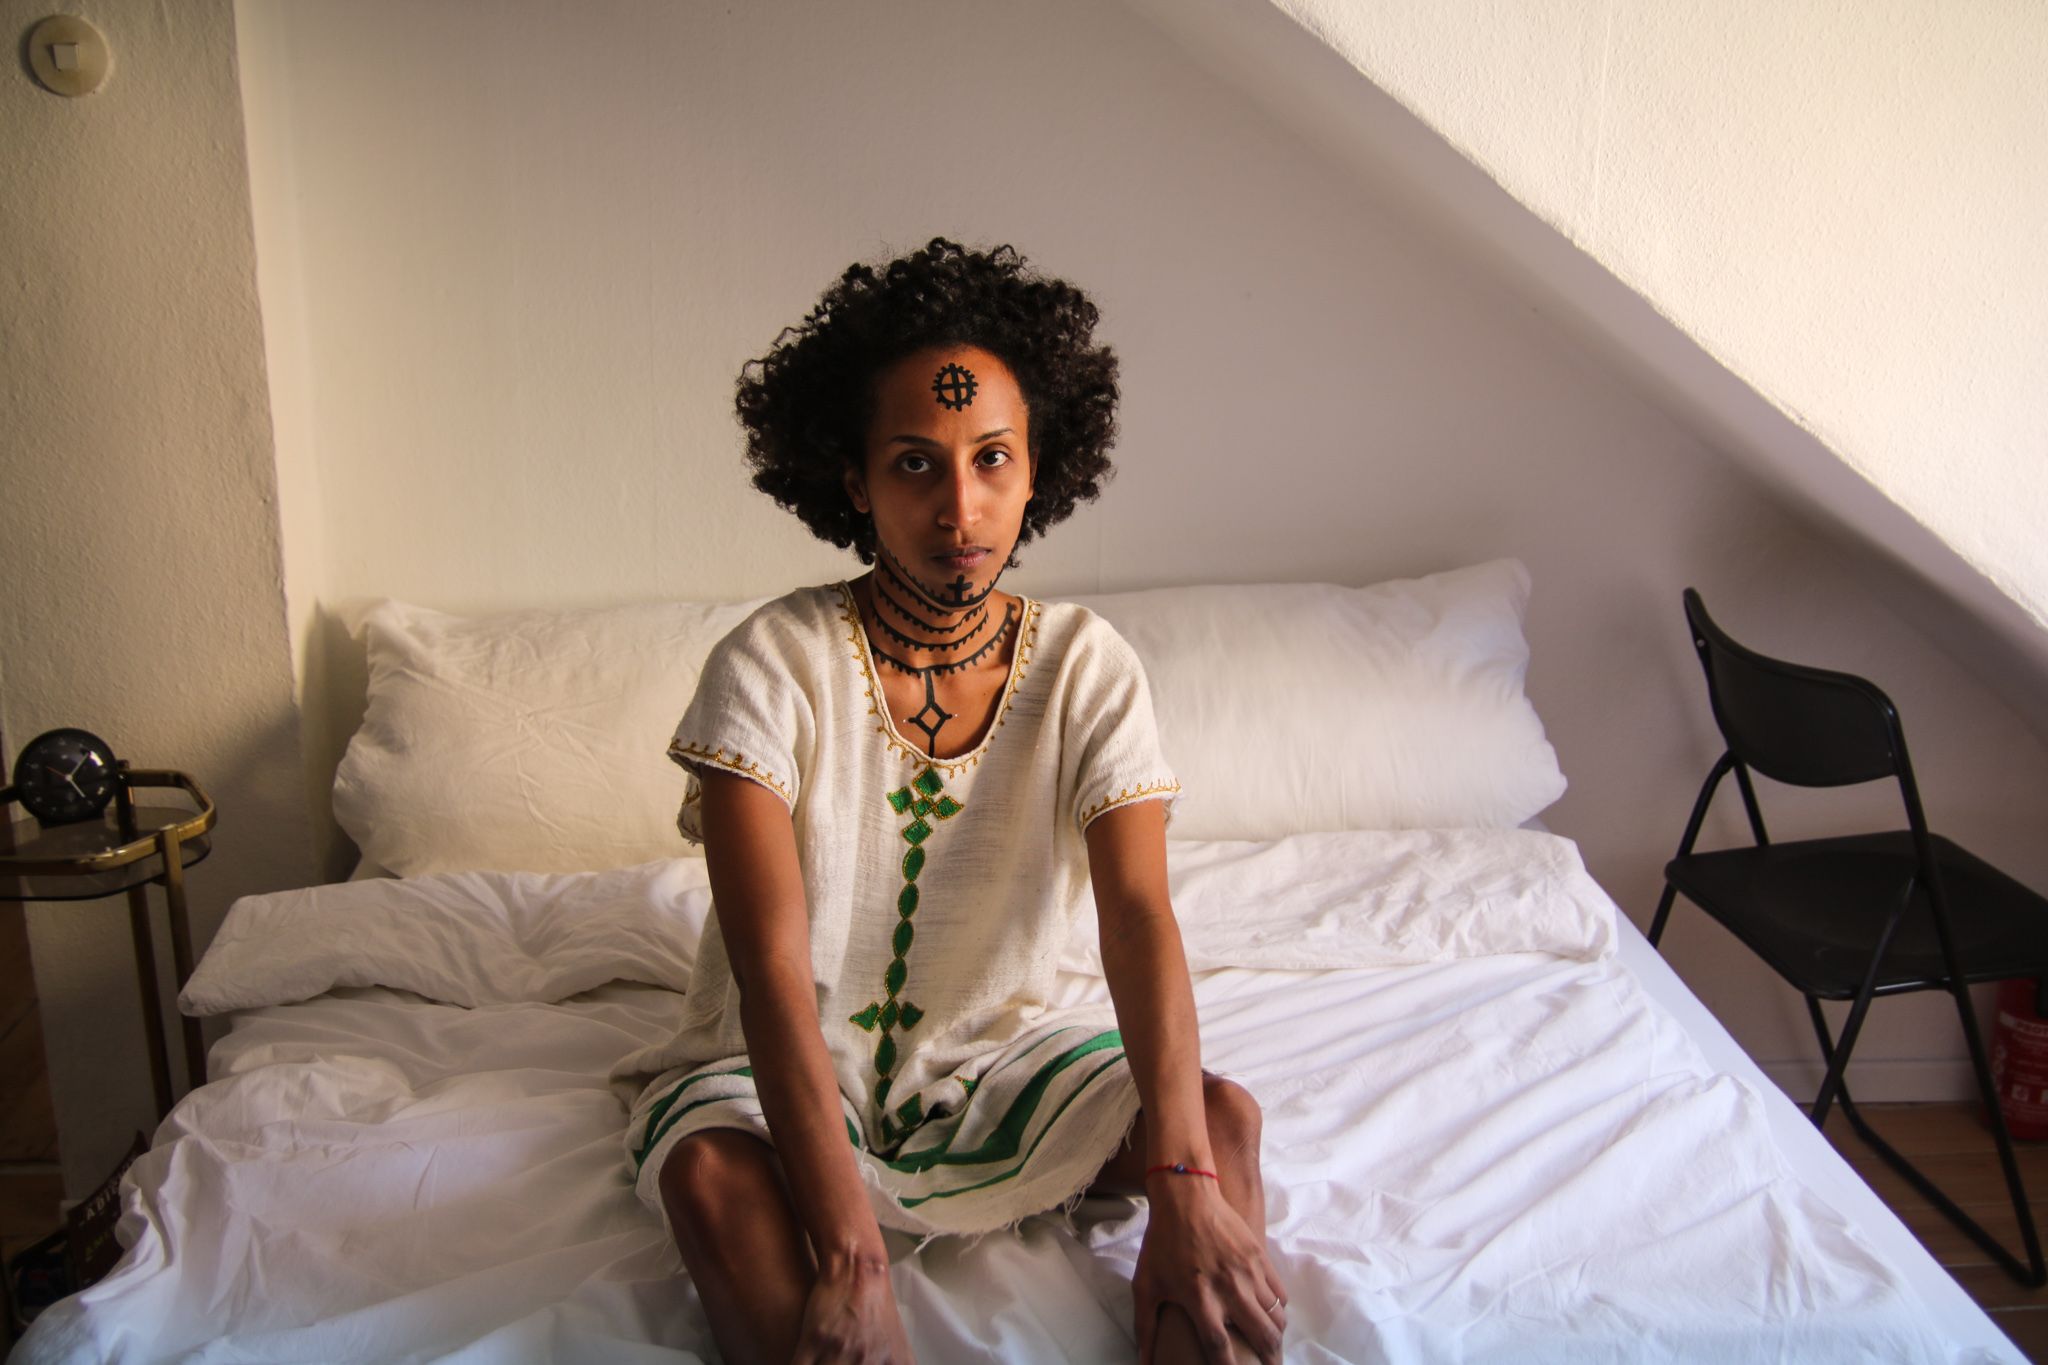 A woman is sitting on the edge of a white covered bed. Her upper body and head are turned sideways to the left behind her. She is looking up, directly into the camera. Her neck, chin and forehead are painted with traditional Ethiopian tattoos.